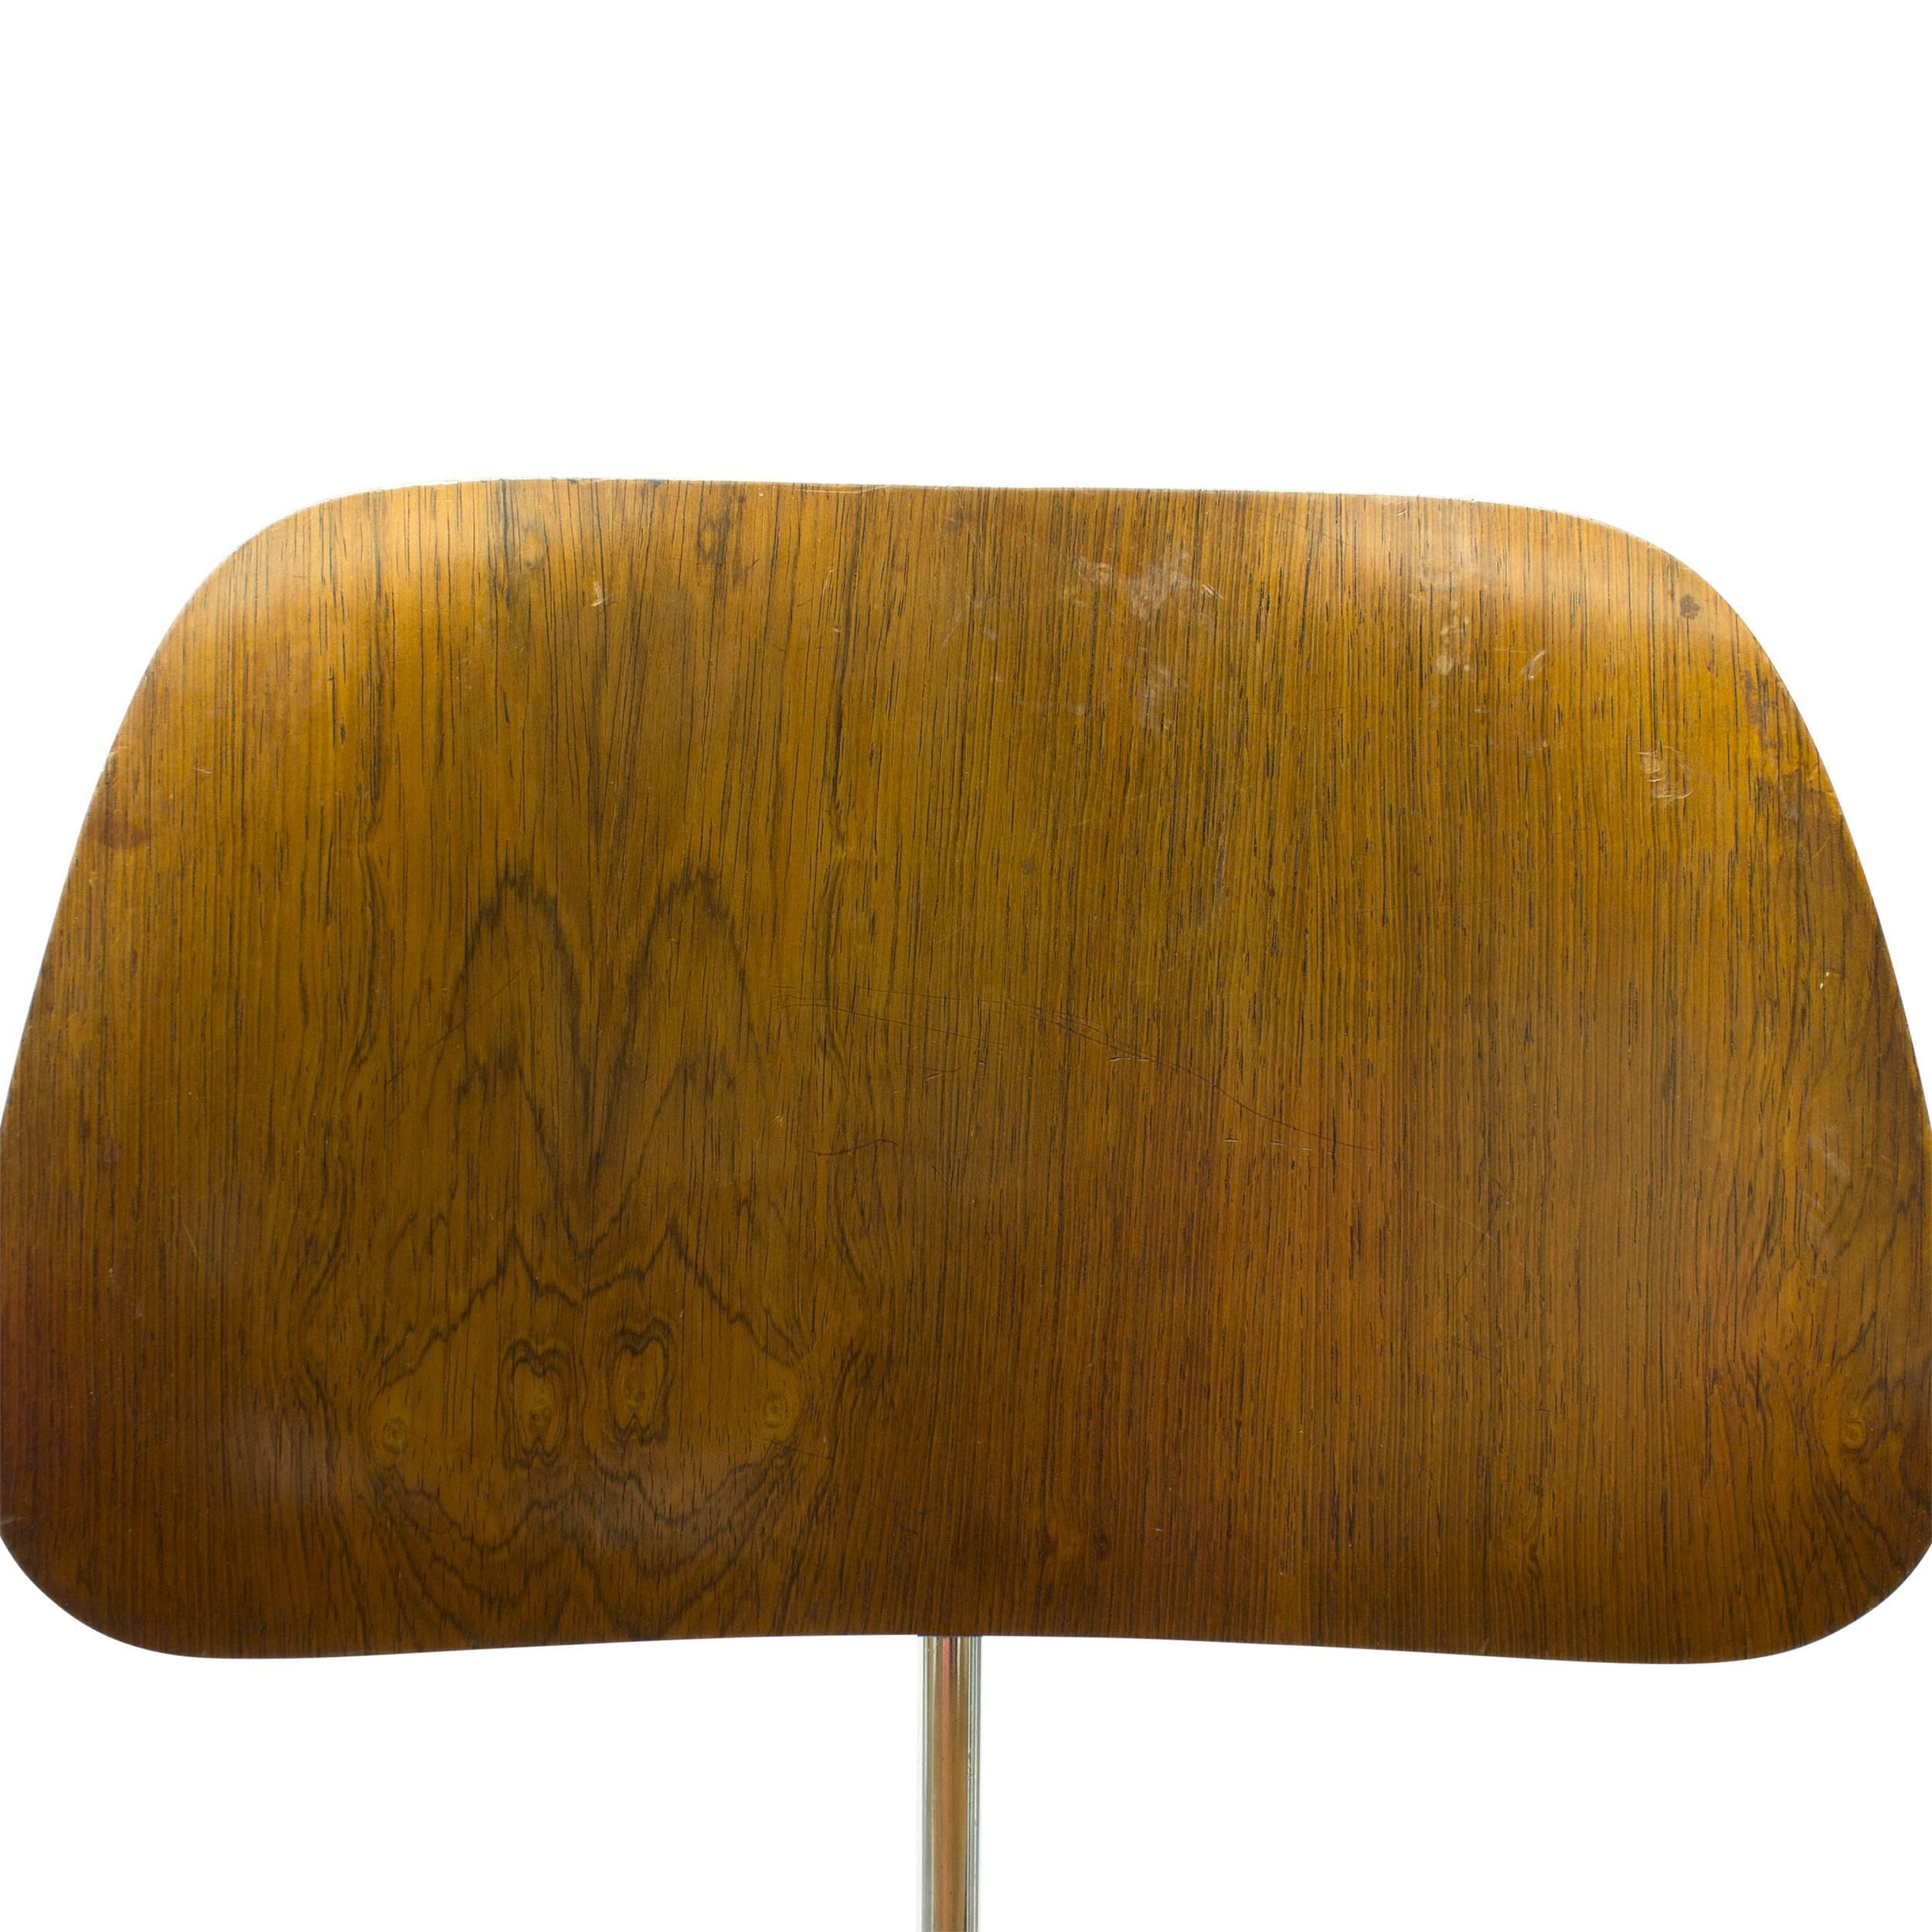 Authentic Vintage Rosewood Herman Miller DCW Chair by Charles & Ray Eames In Fair Condition For Sale In Brooklyn, NY